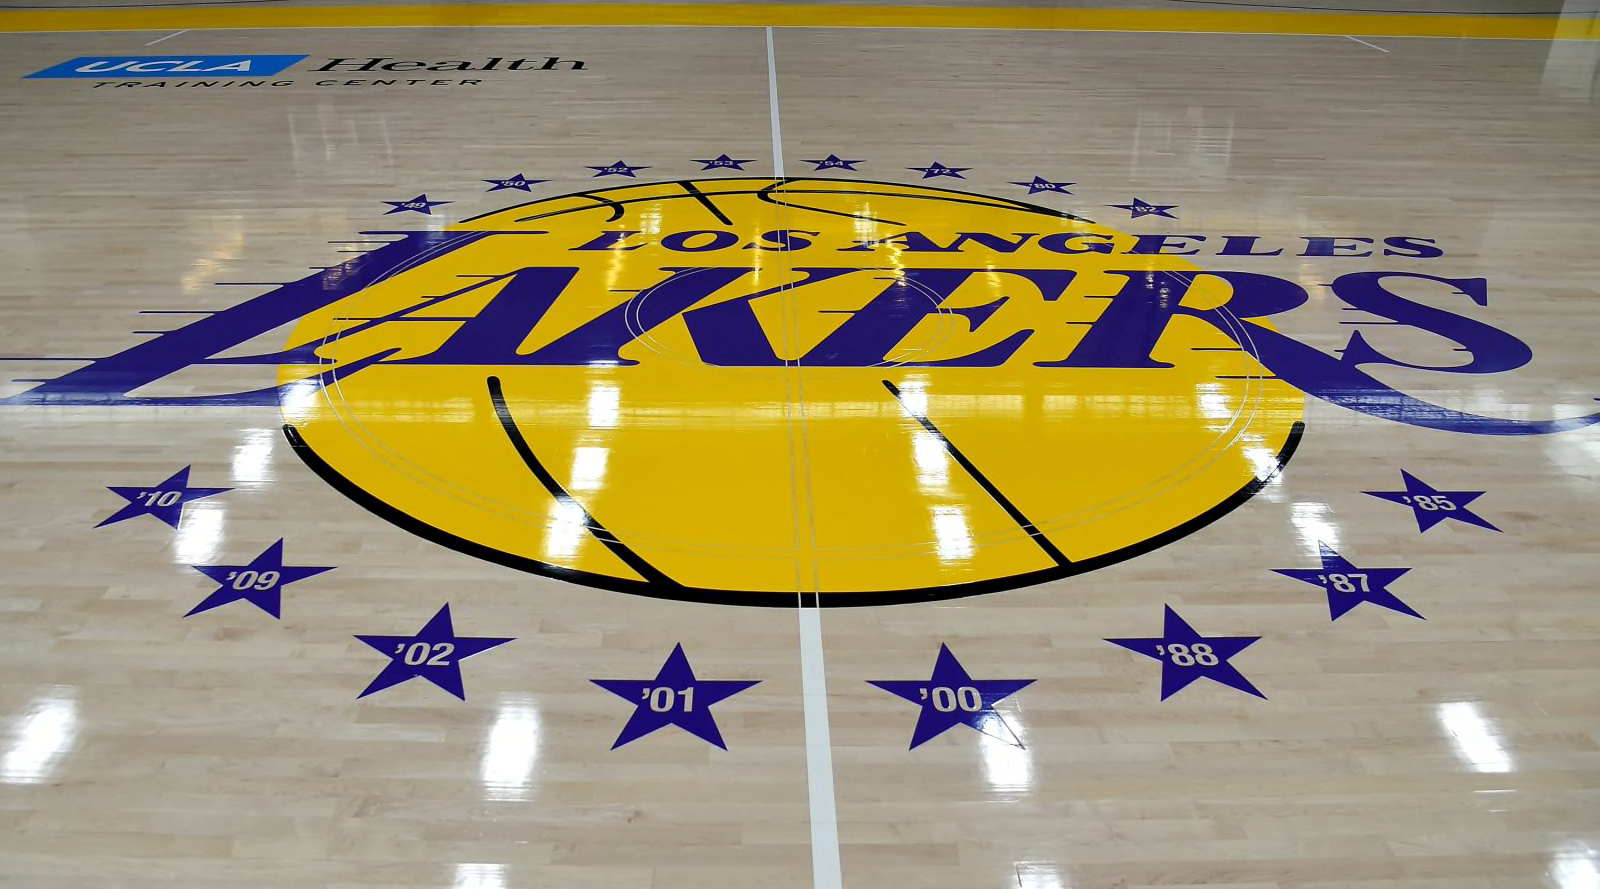 The Los Angeles Lakers are the Best Basketball Team in the World – Kings'  Courier